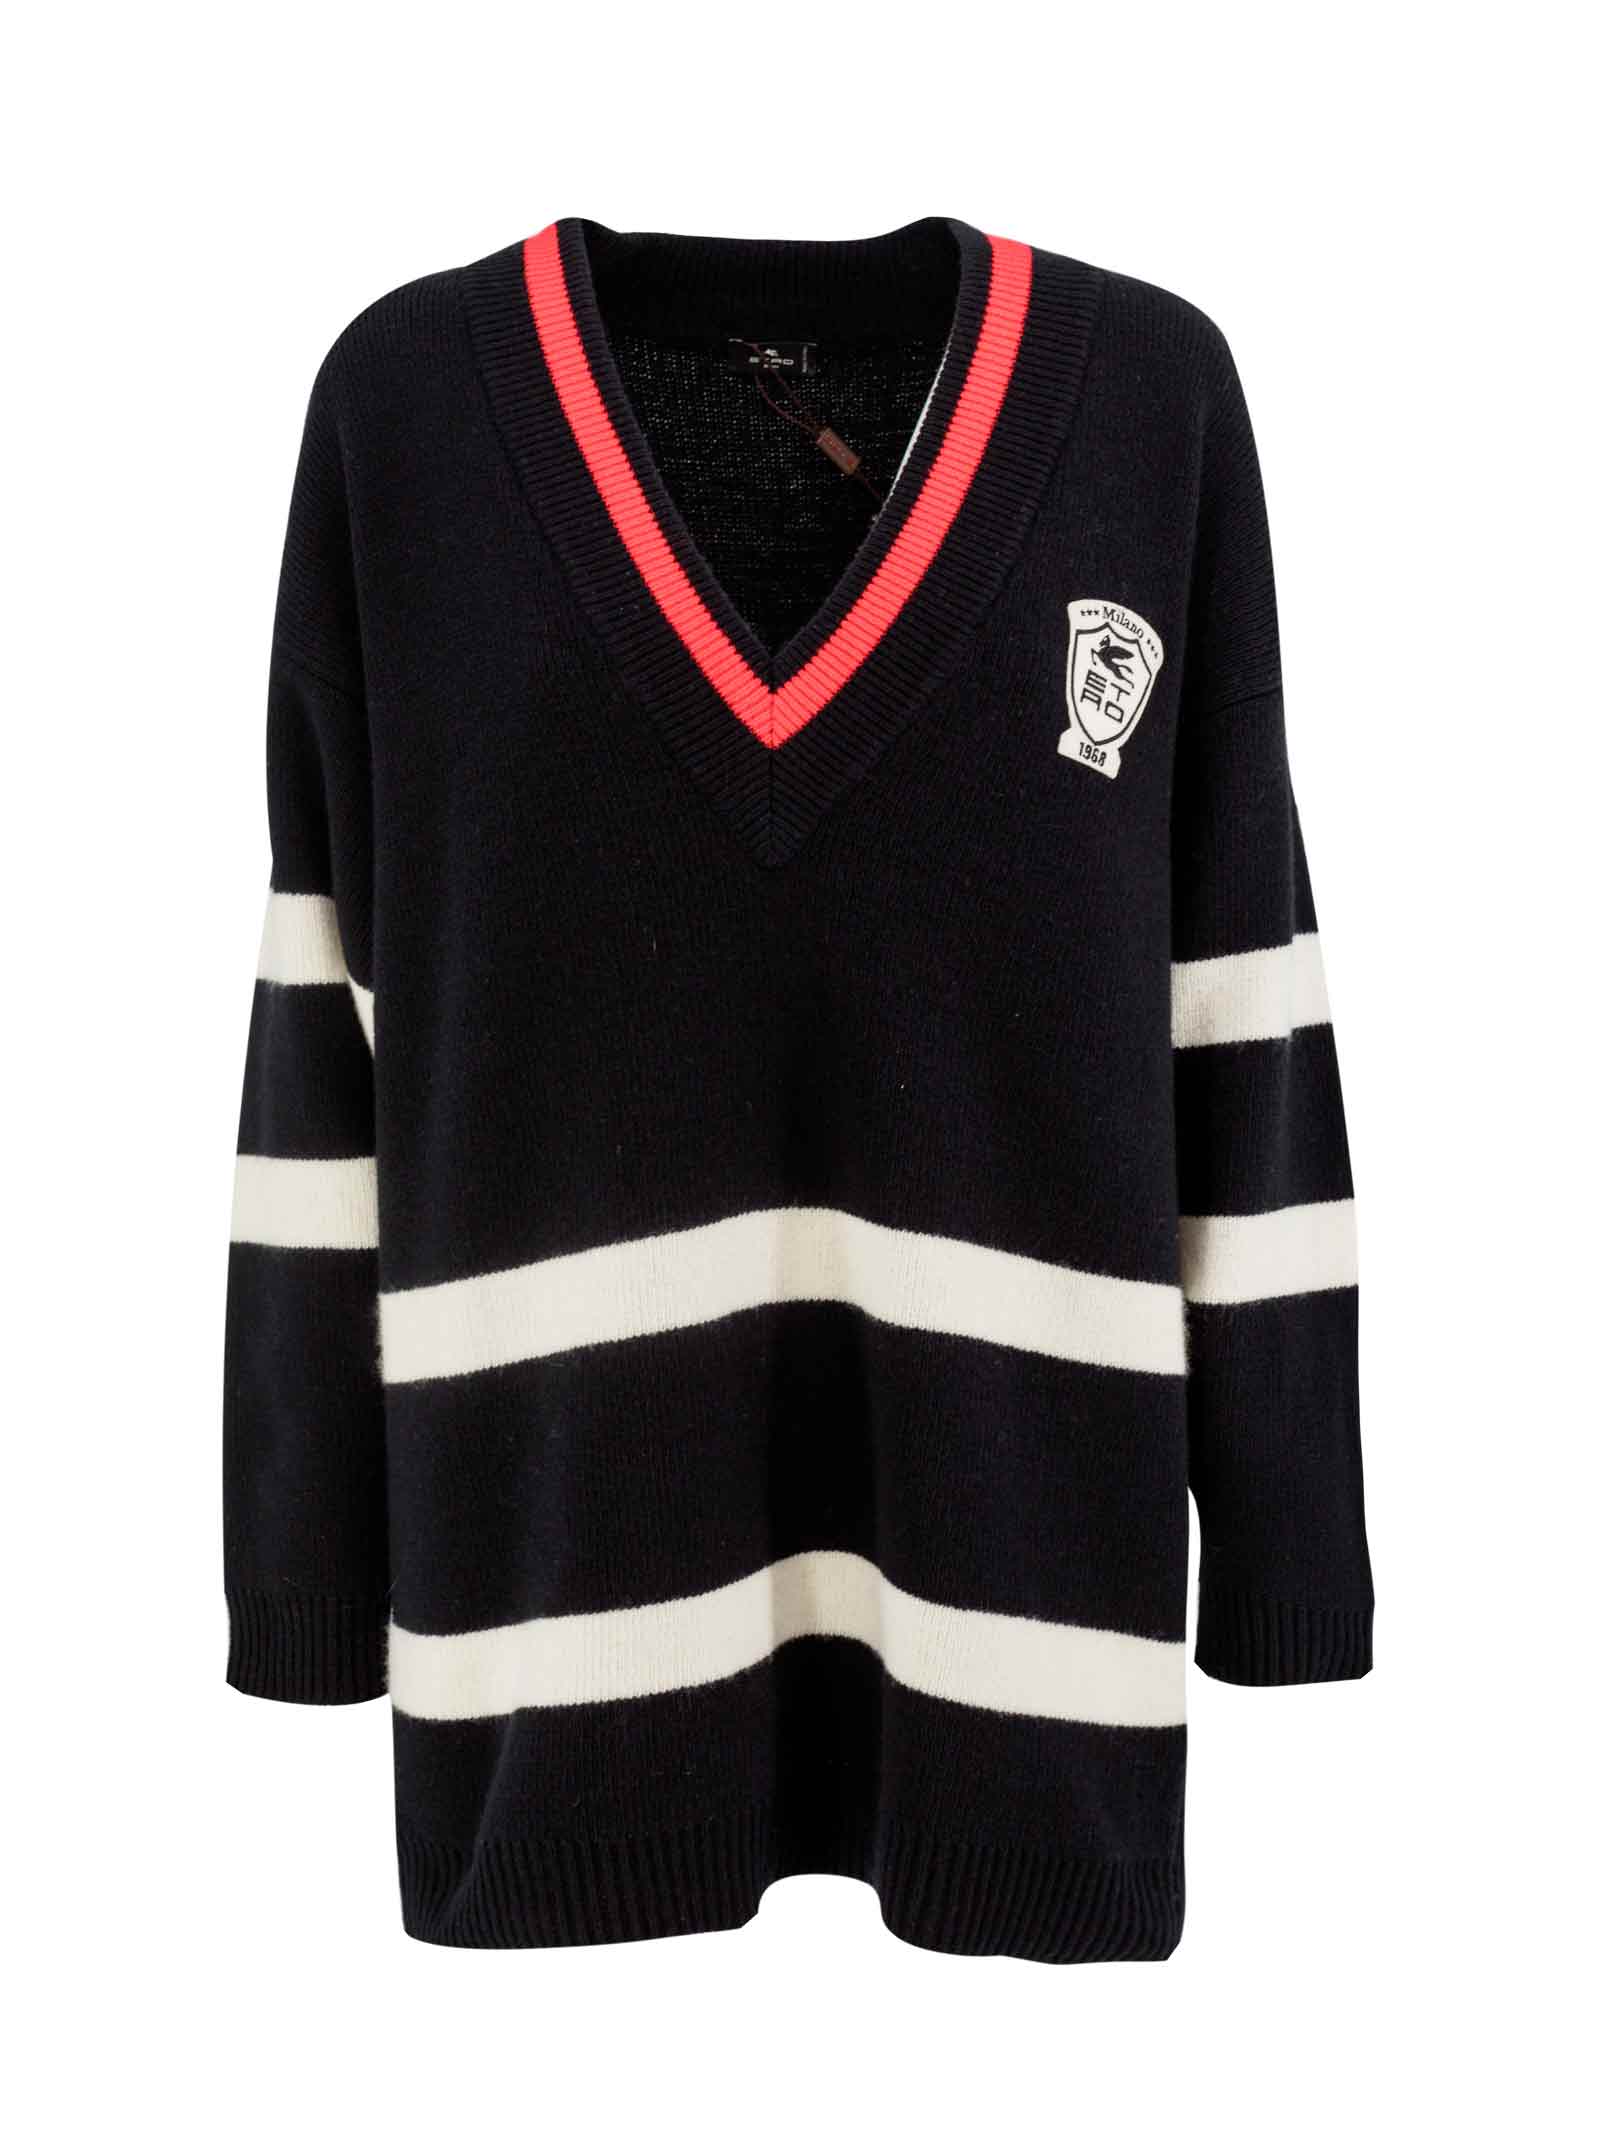 Etro Striped Wool Sweater With Heraldic Patch